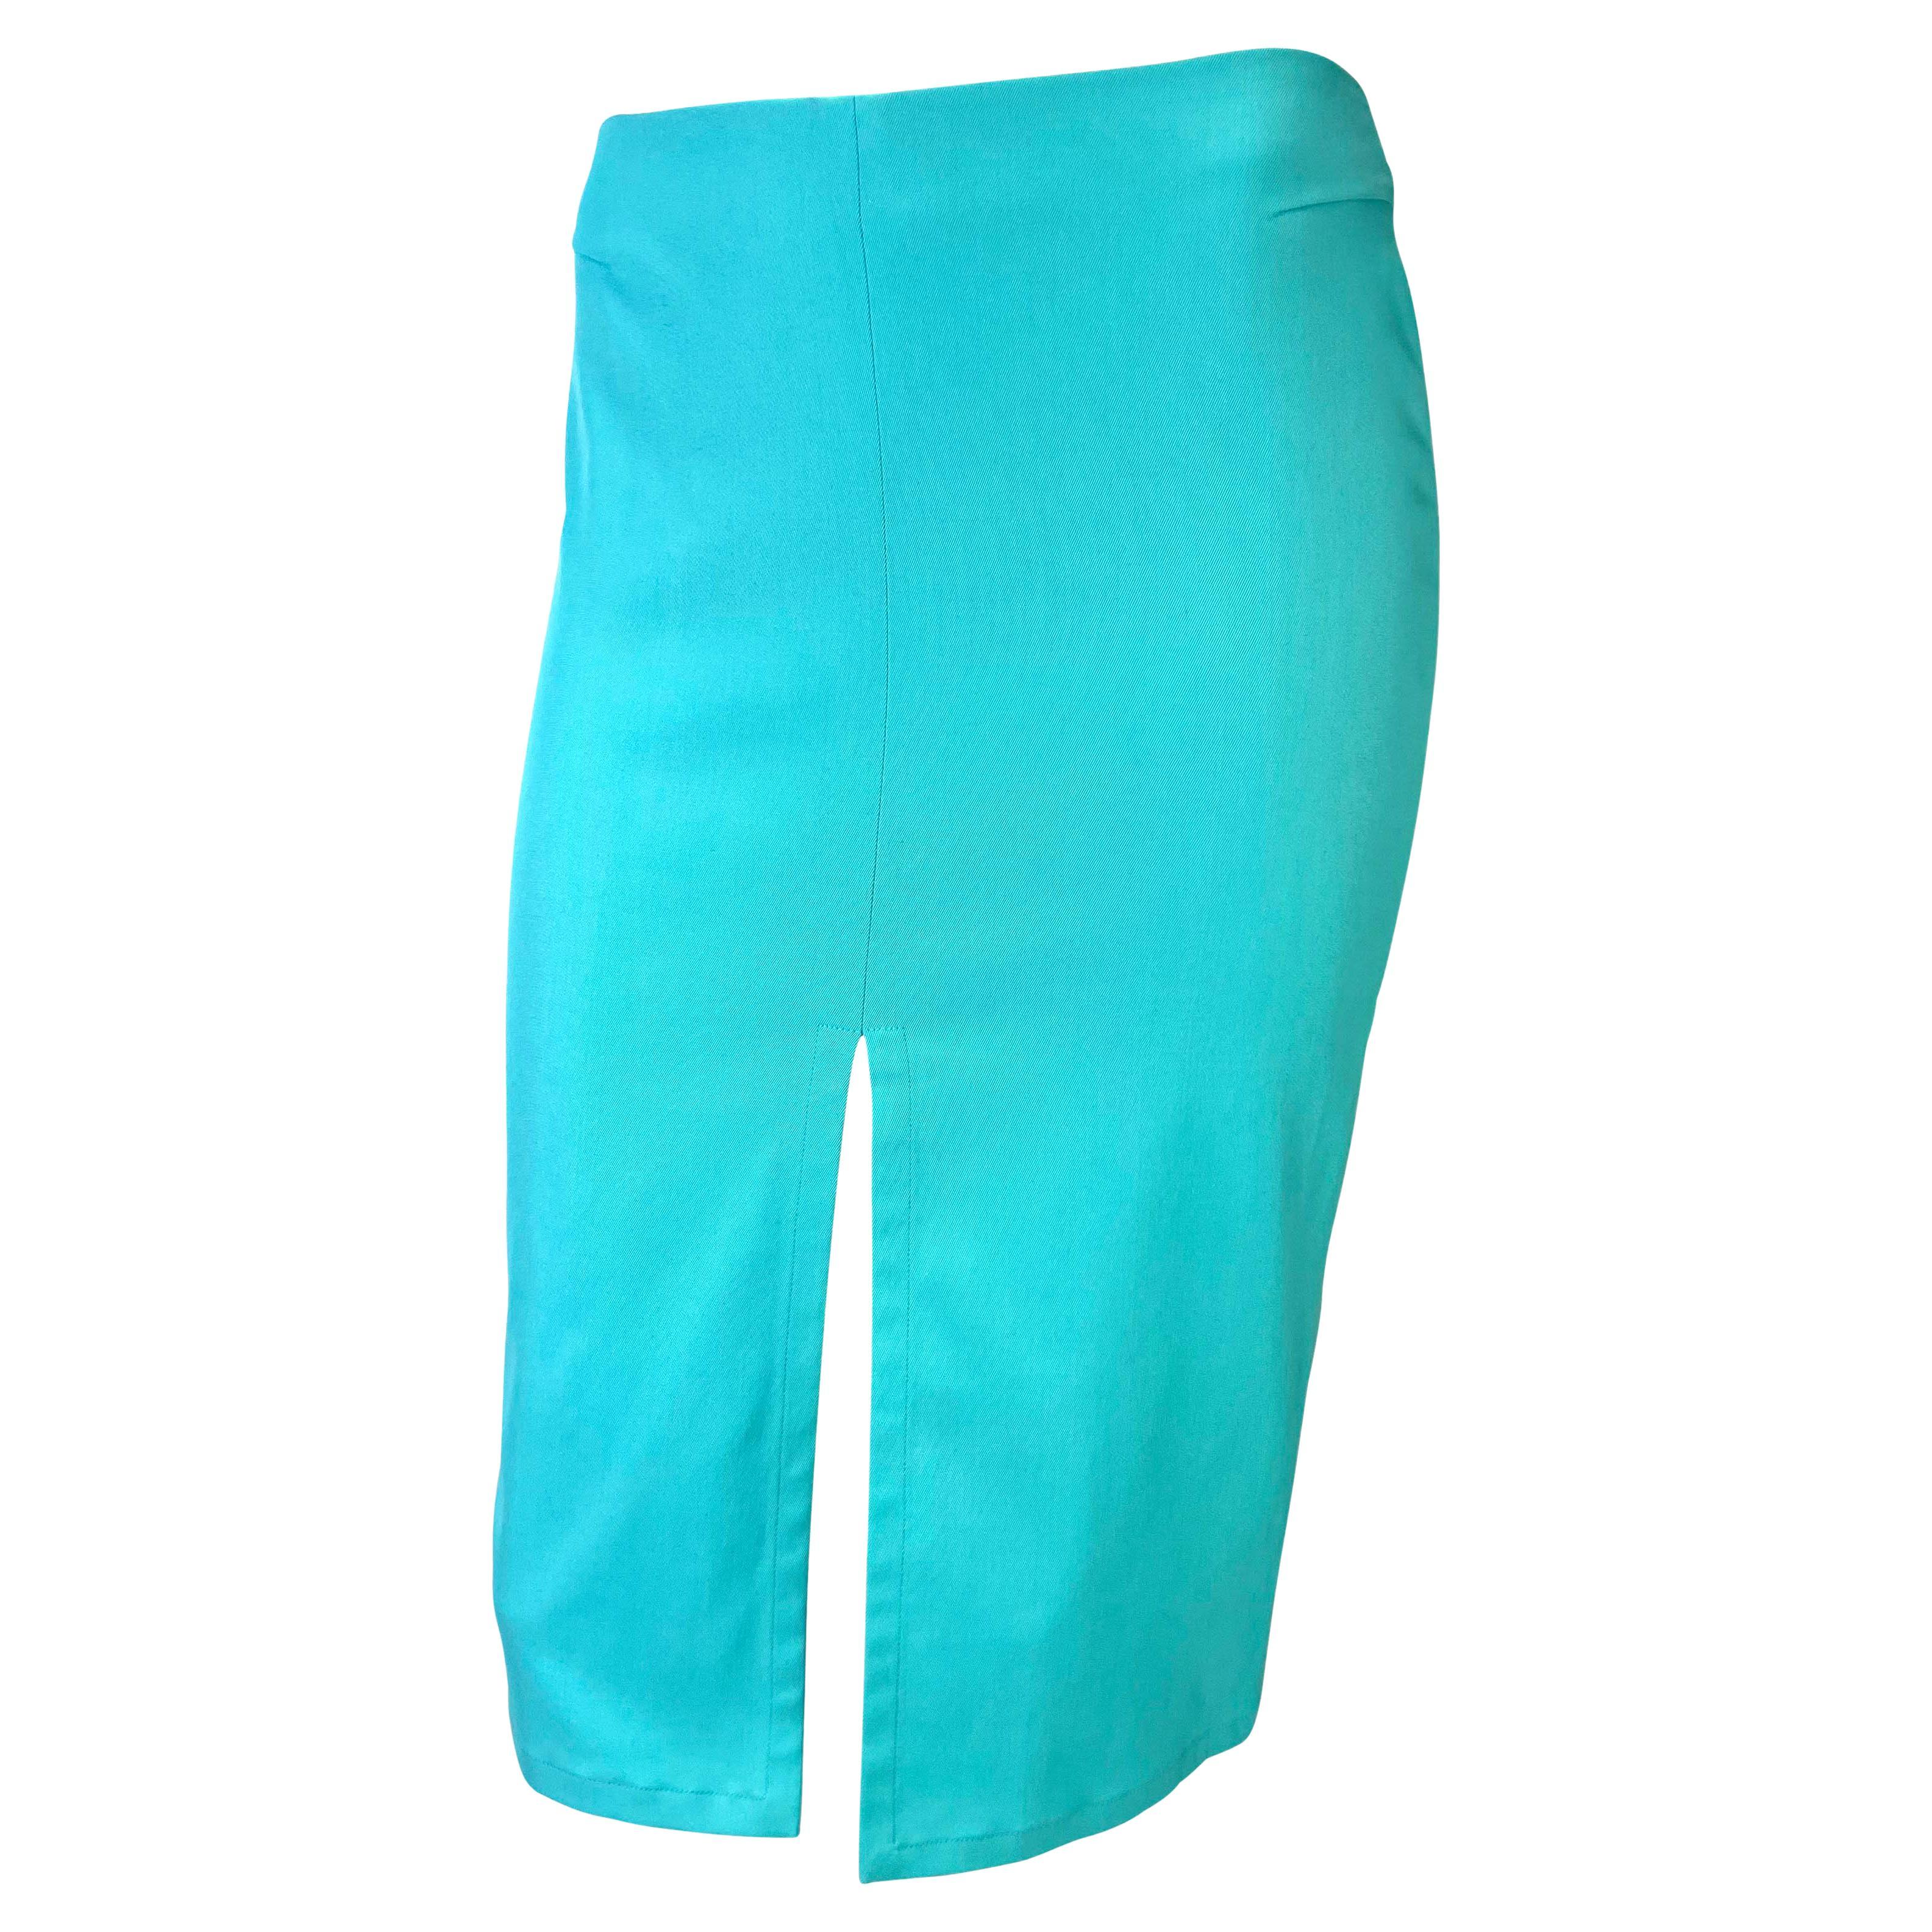 TheRealList presents: a sleek turquoise skirt designed by Tom Ford for Gucci's Spring/Summer 2000 collection. The unique mirrored slit at the front and back of the skirt creates a flirty split that almost creates a mini skirt silhouette. The bold